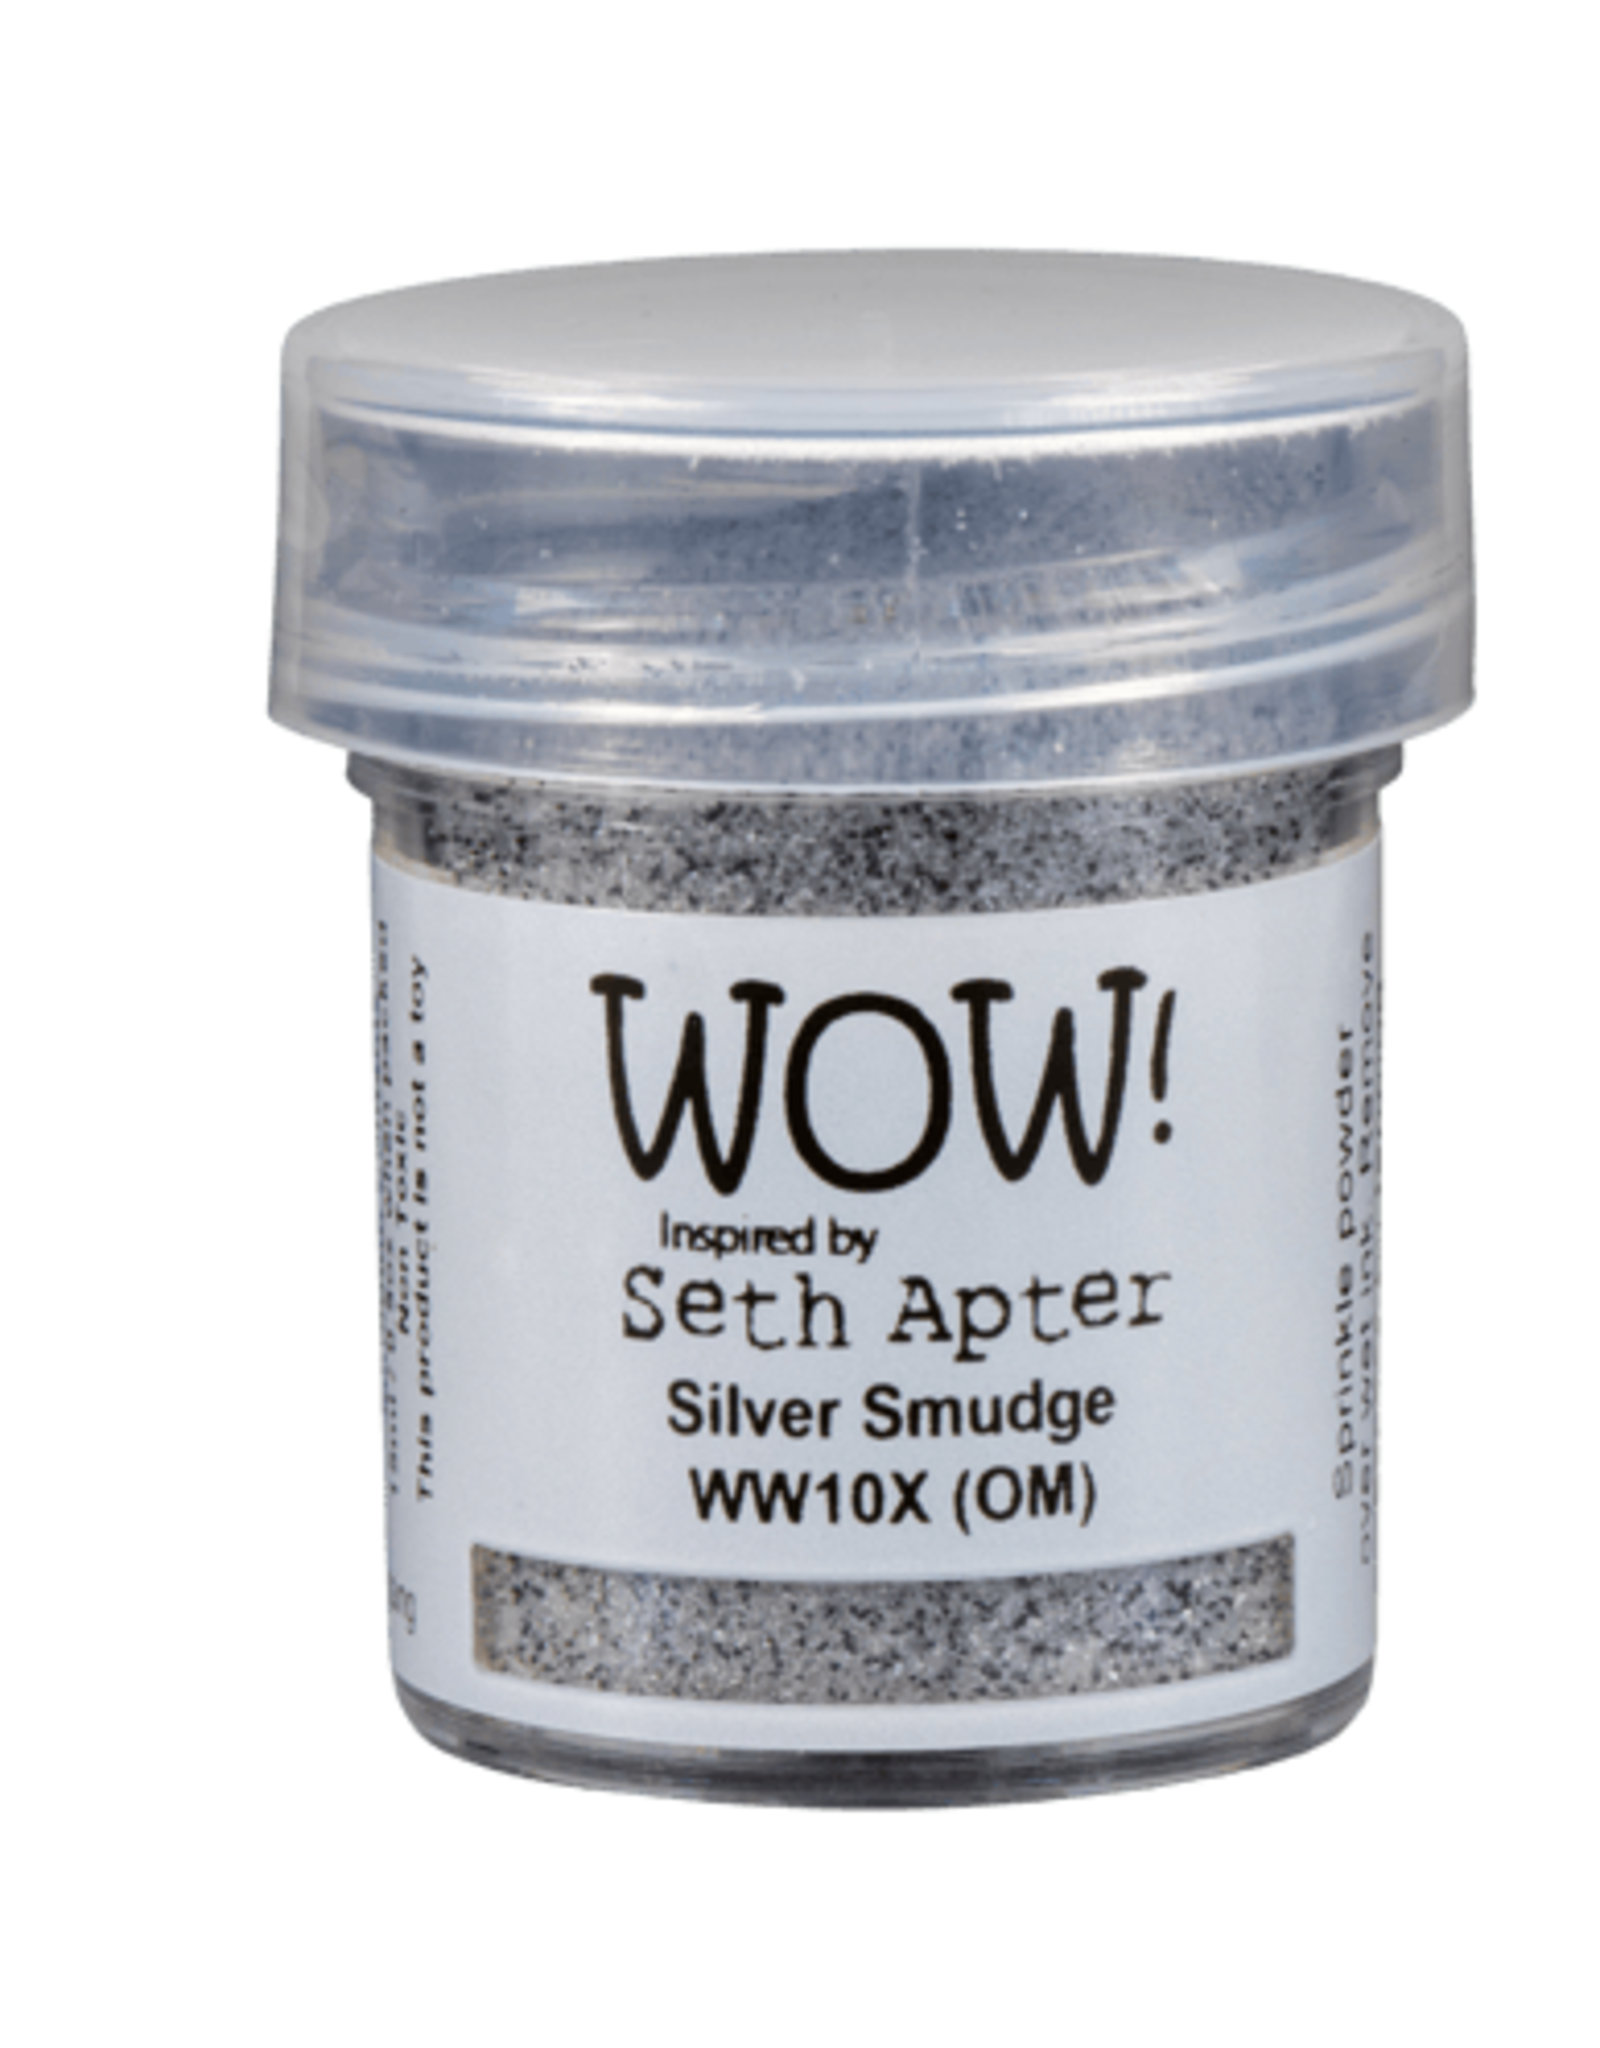 WOW! WOW! SETH APTER SILVER SMUDGE EMBOSSING POWDER 0.5OZ